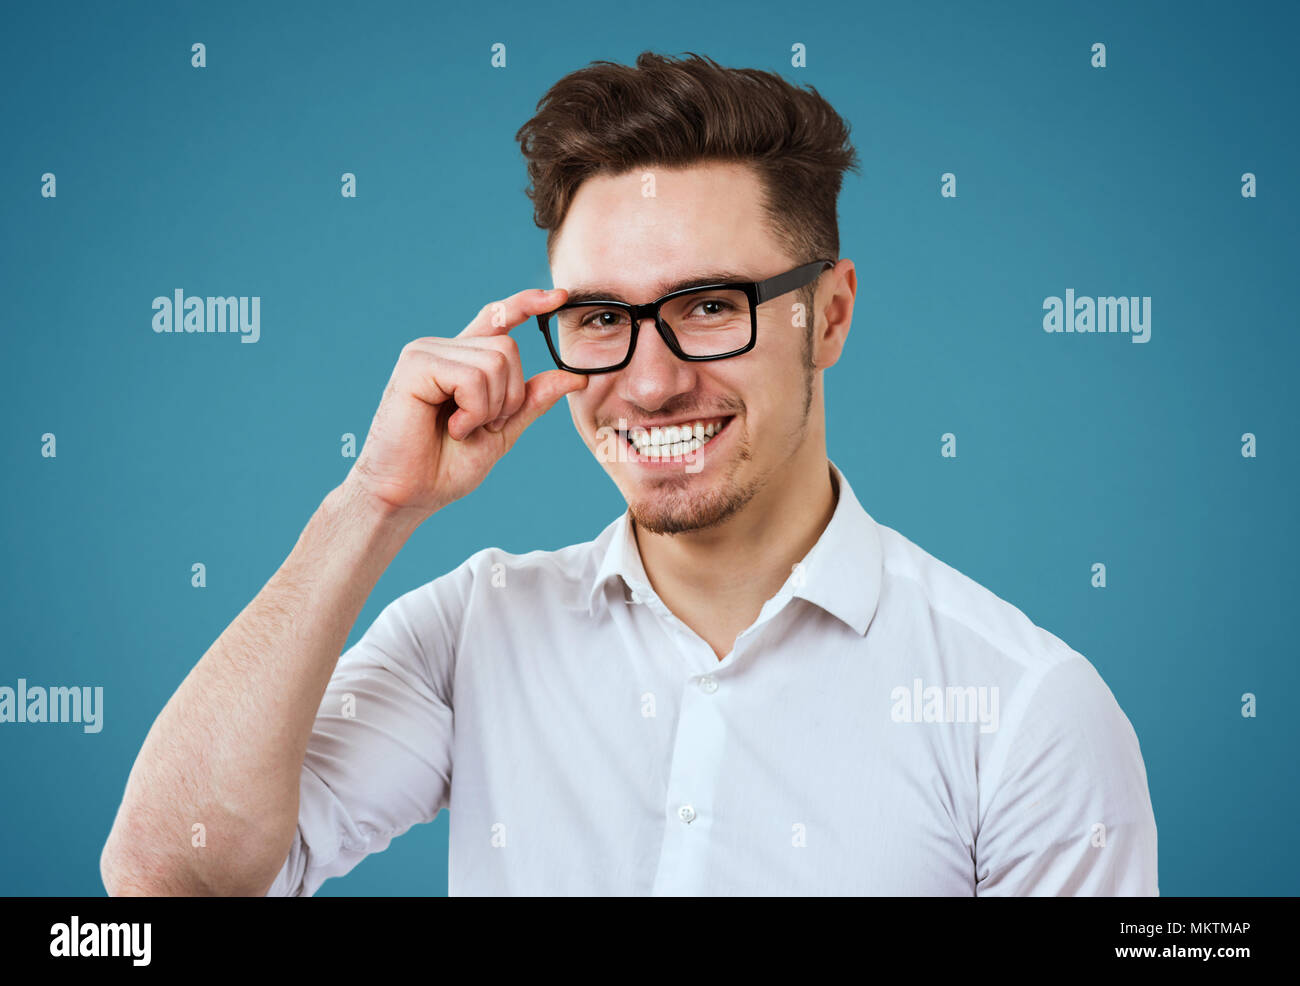 Happy young man wearing white shirt and glasses posing on blue background Stock Photo